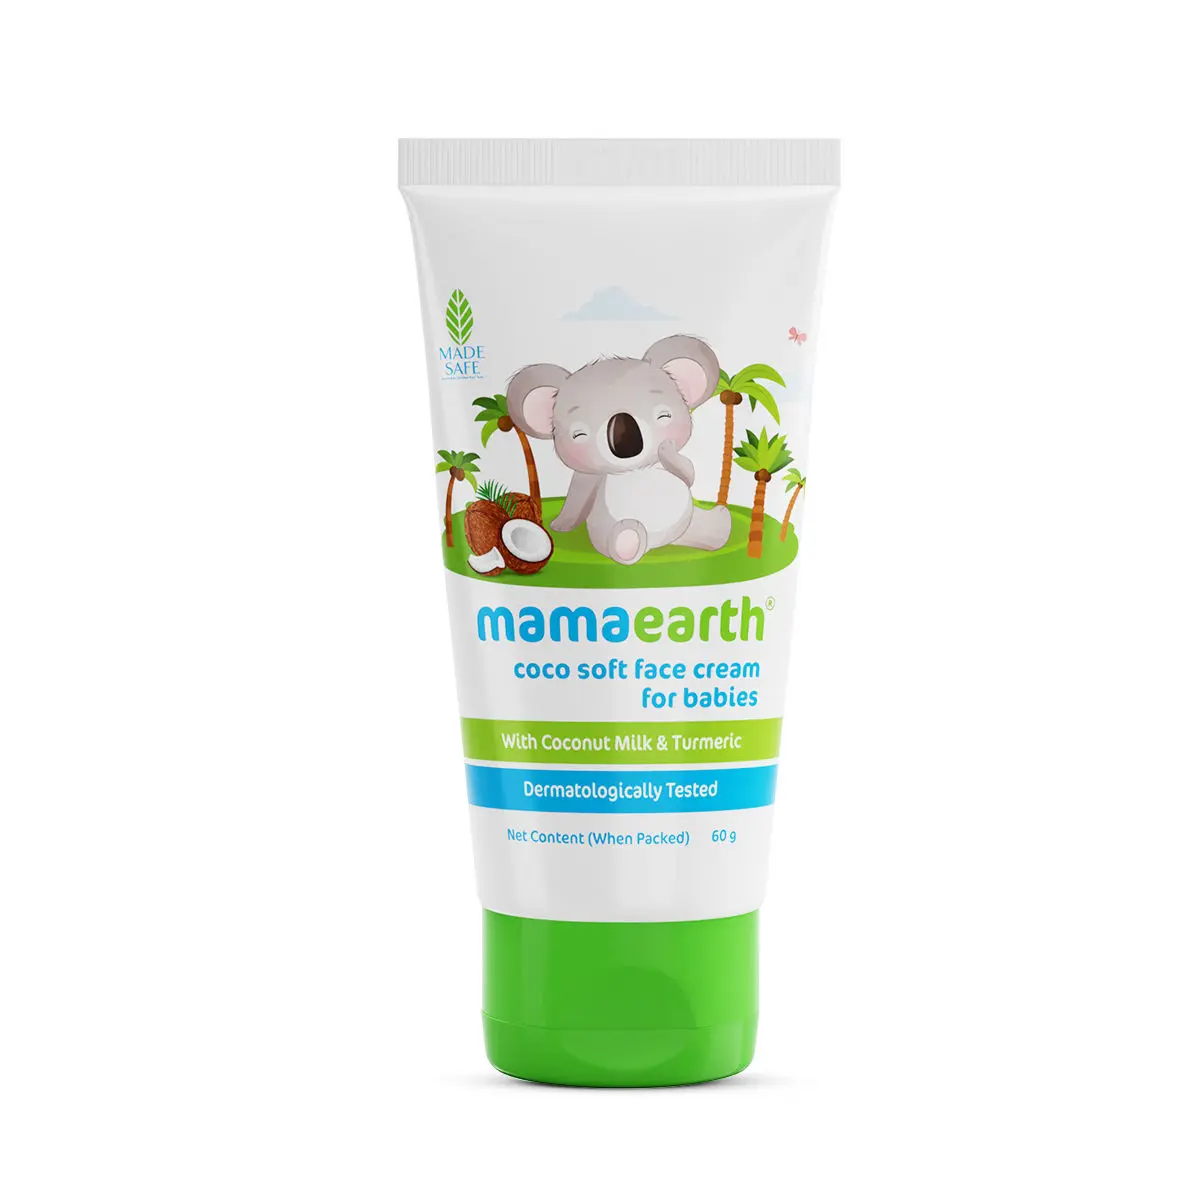 Mamaearth Coco Soft Face Cream With Coconut Milk & Turmeric For Babies, (60 g)